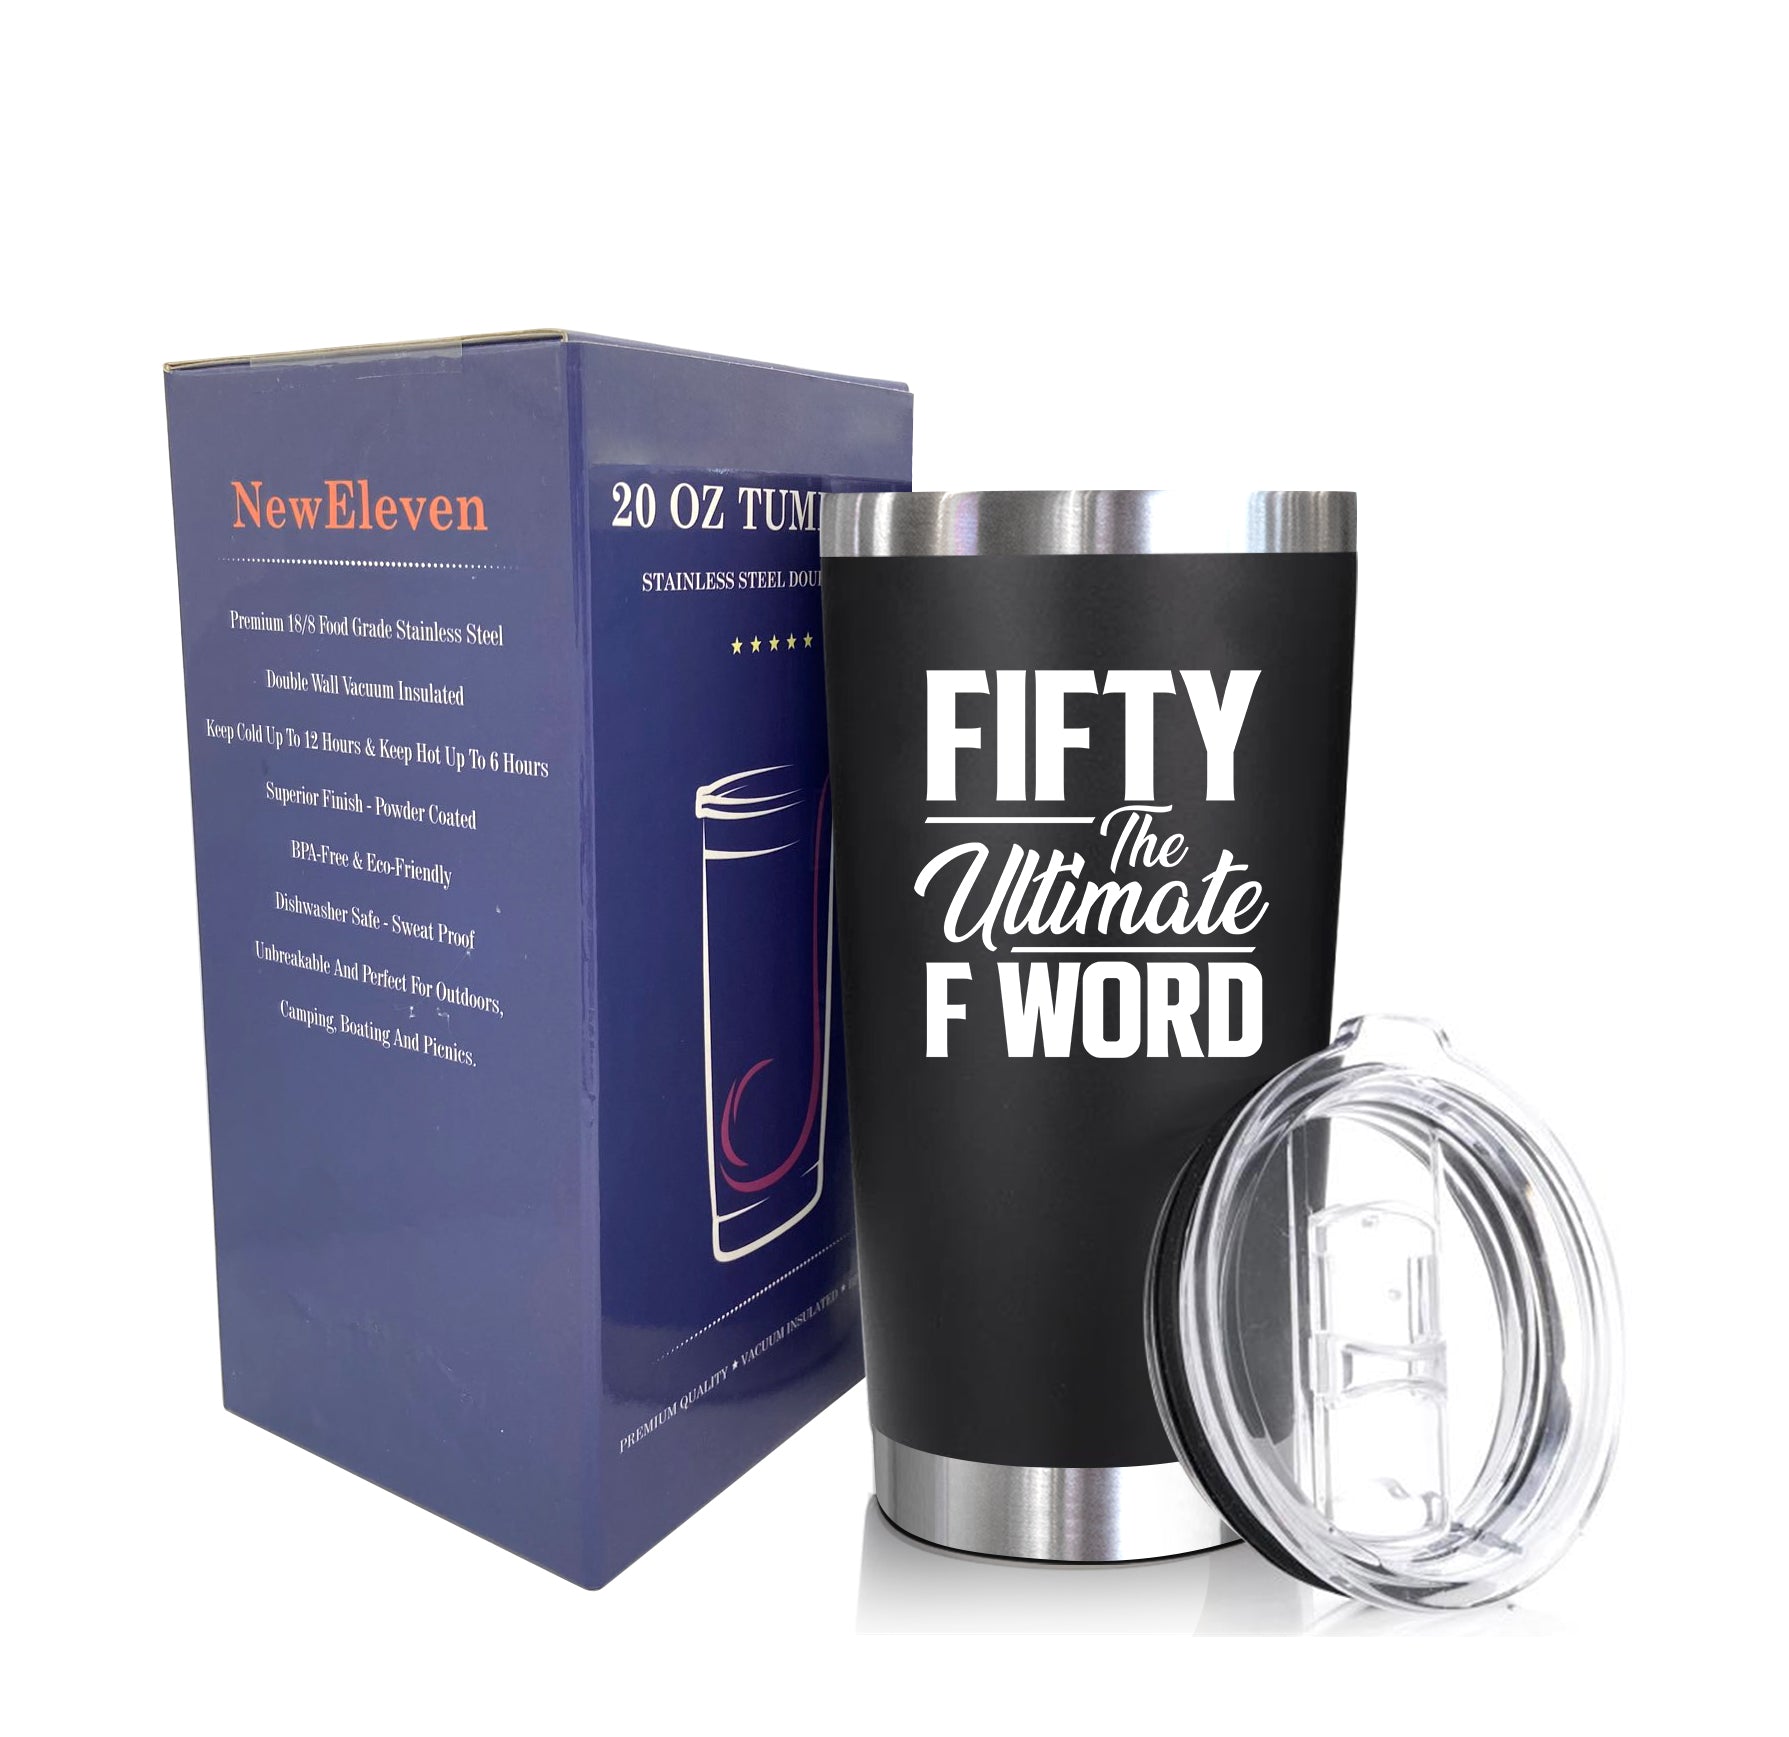 50th Birthday Gifts for Men - Stainless Steel Insulated 50th